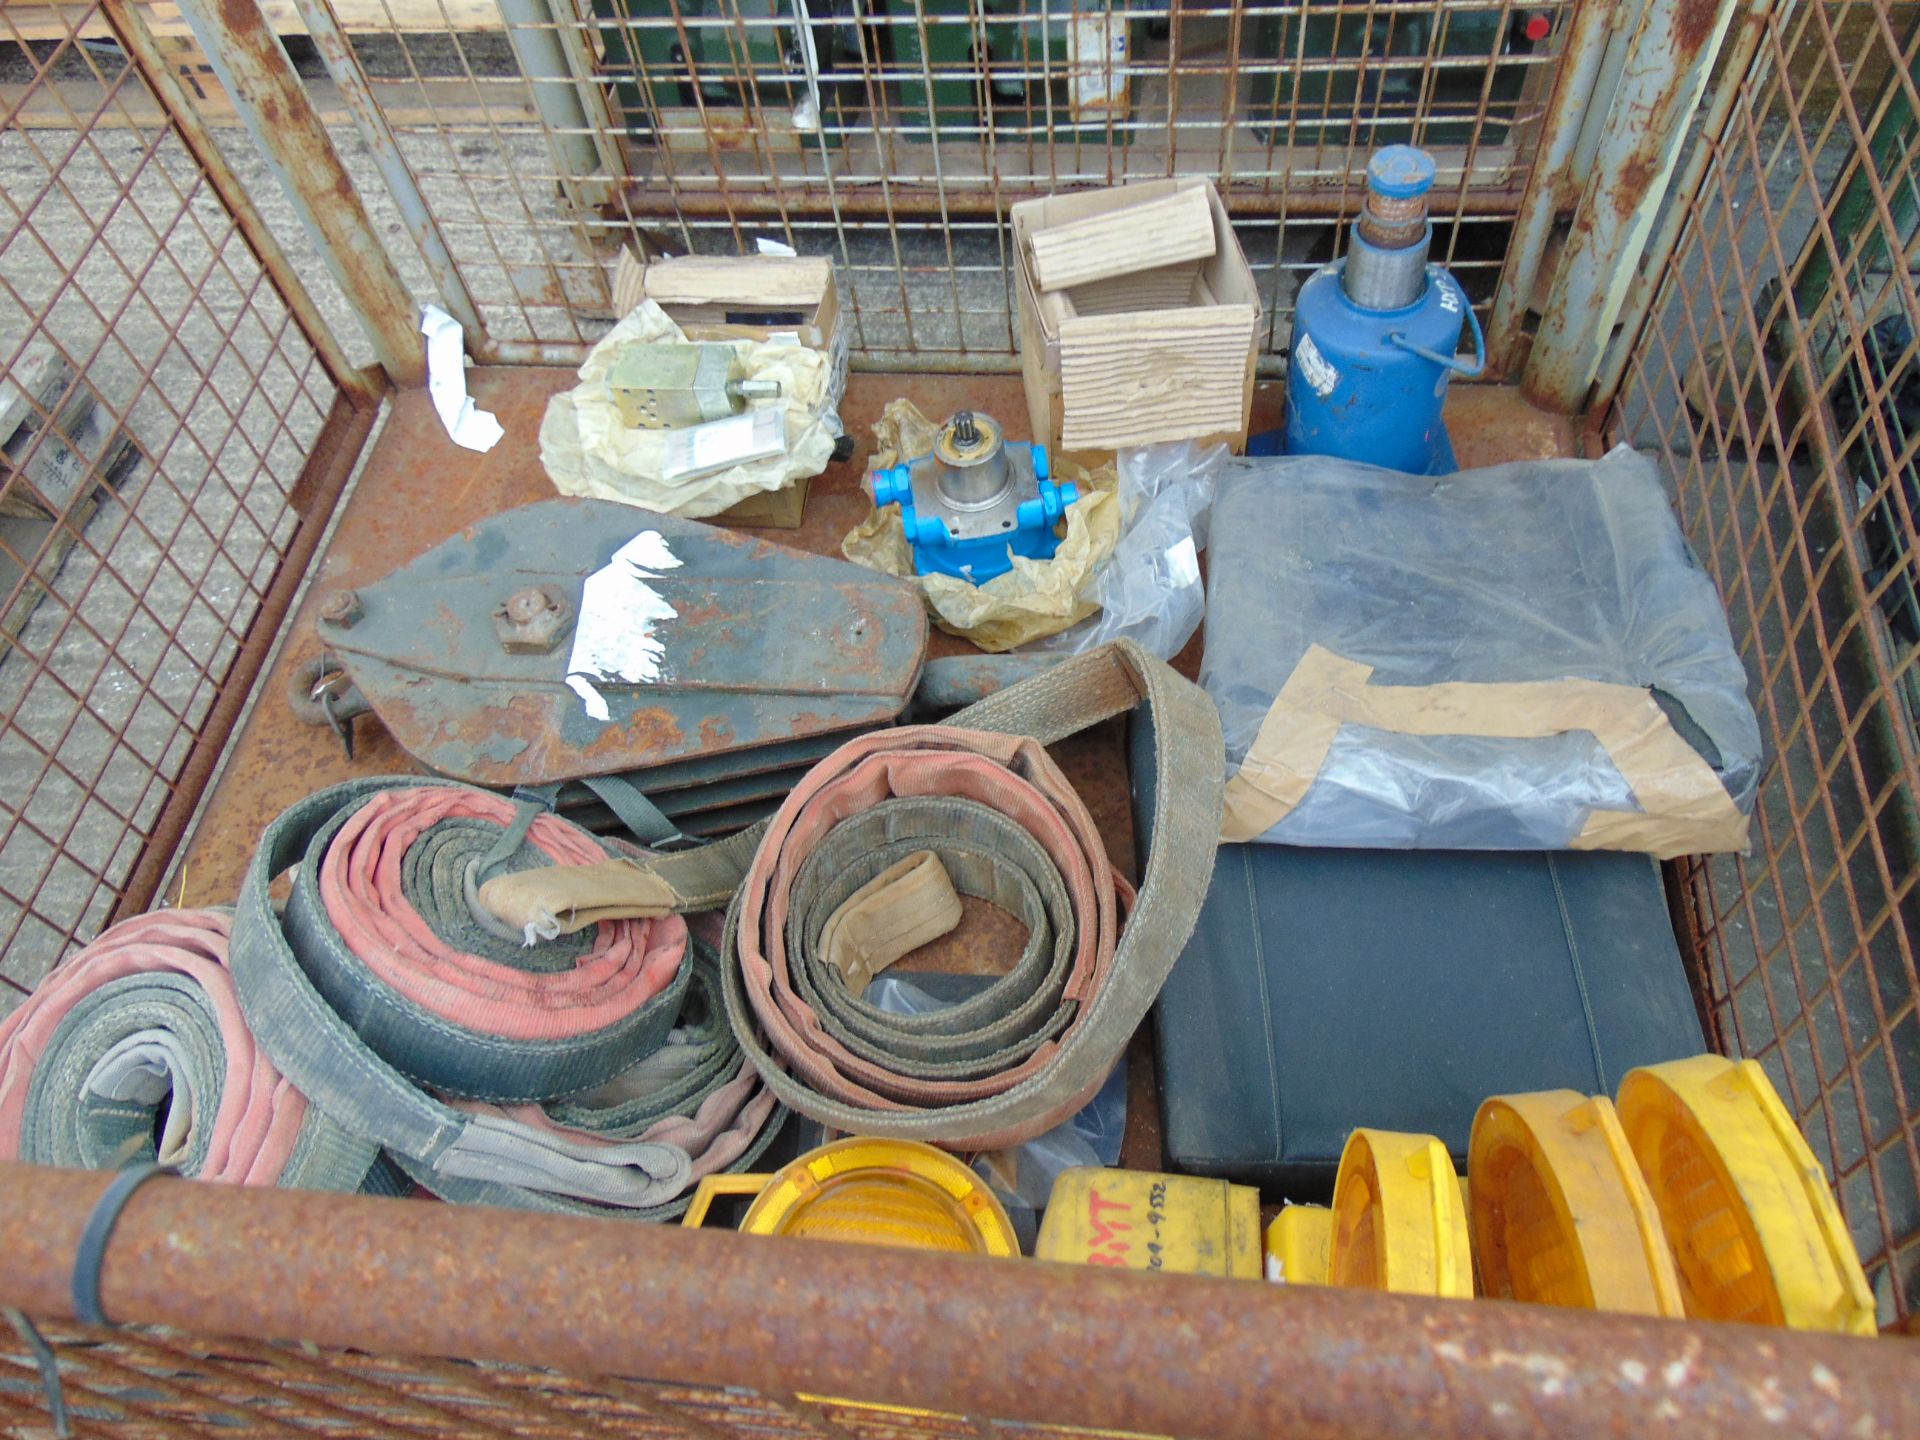 1 x Stillage Land Rover Tow Strops, Hydraulic Pump Recovery Snatch Block Etc - Image 7 of 9